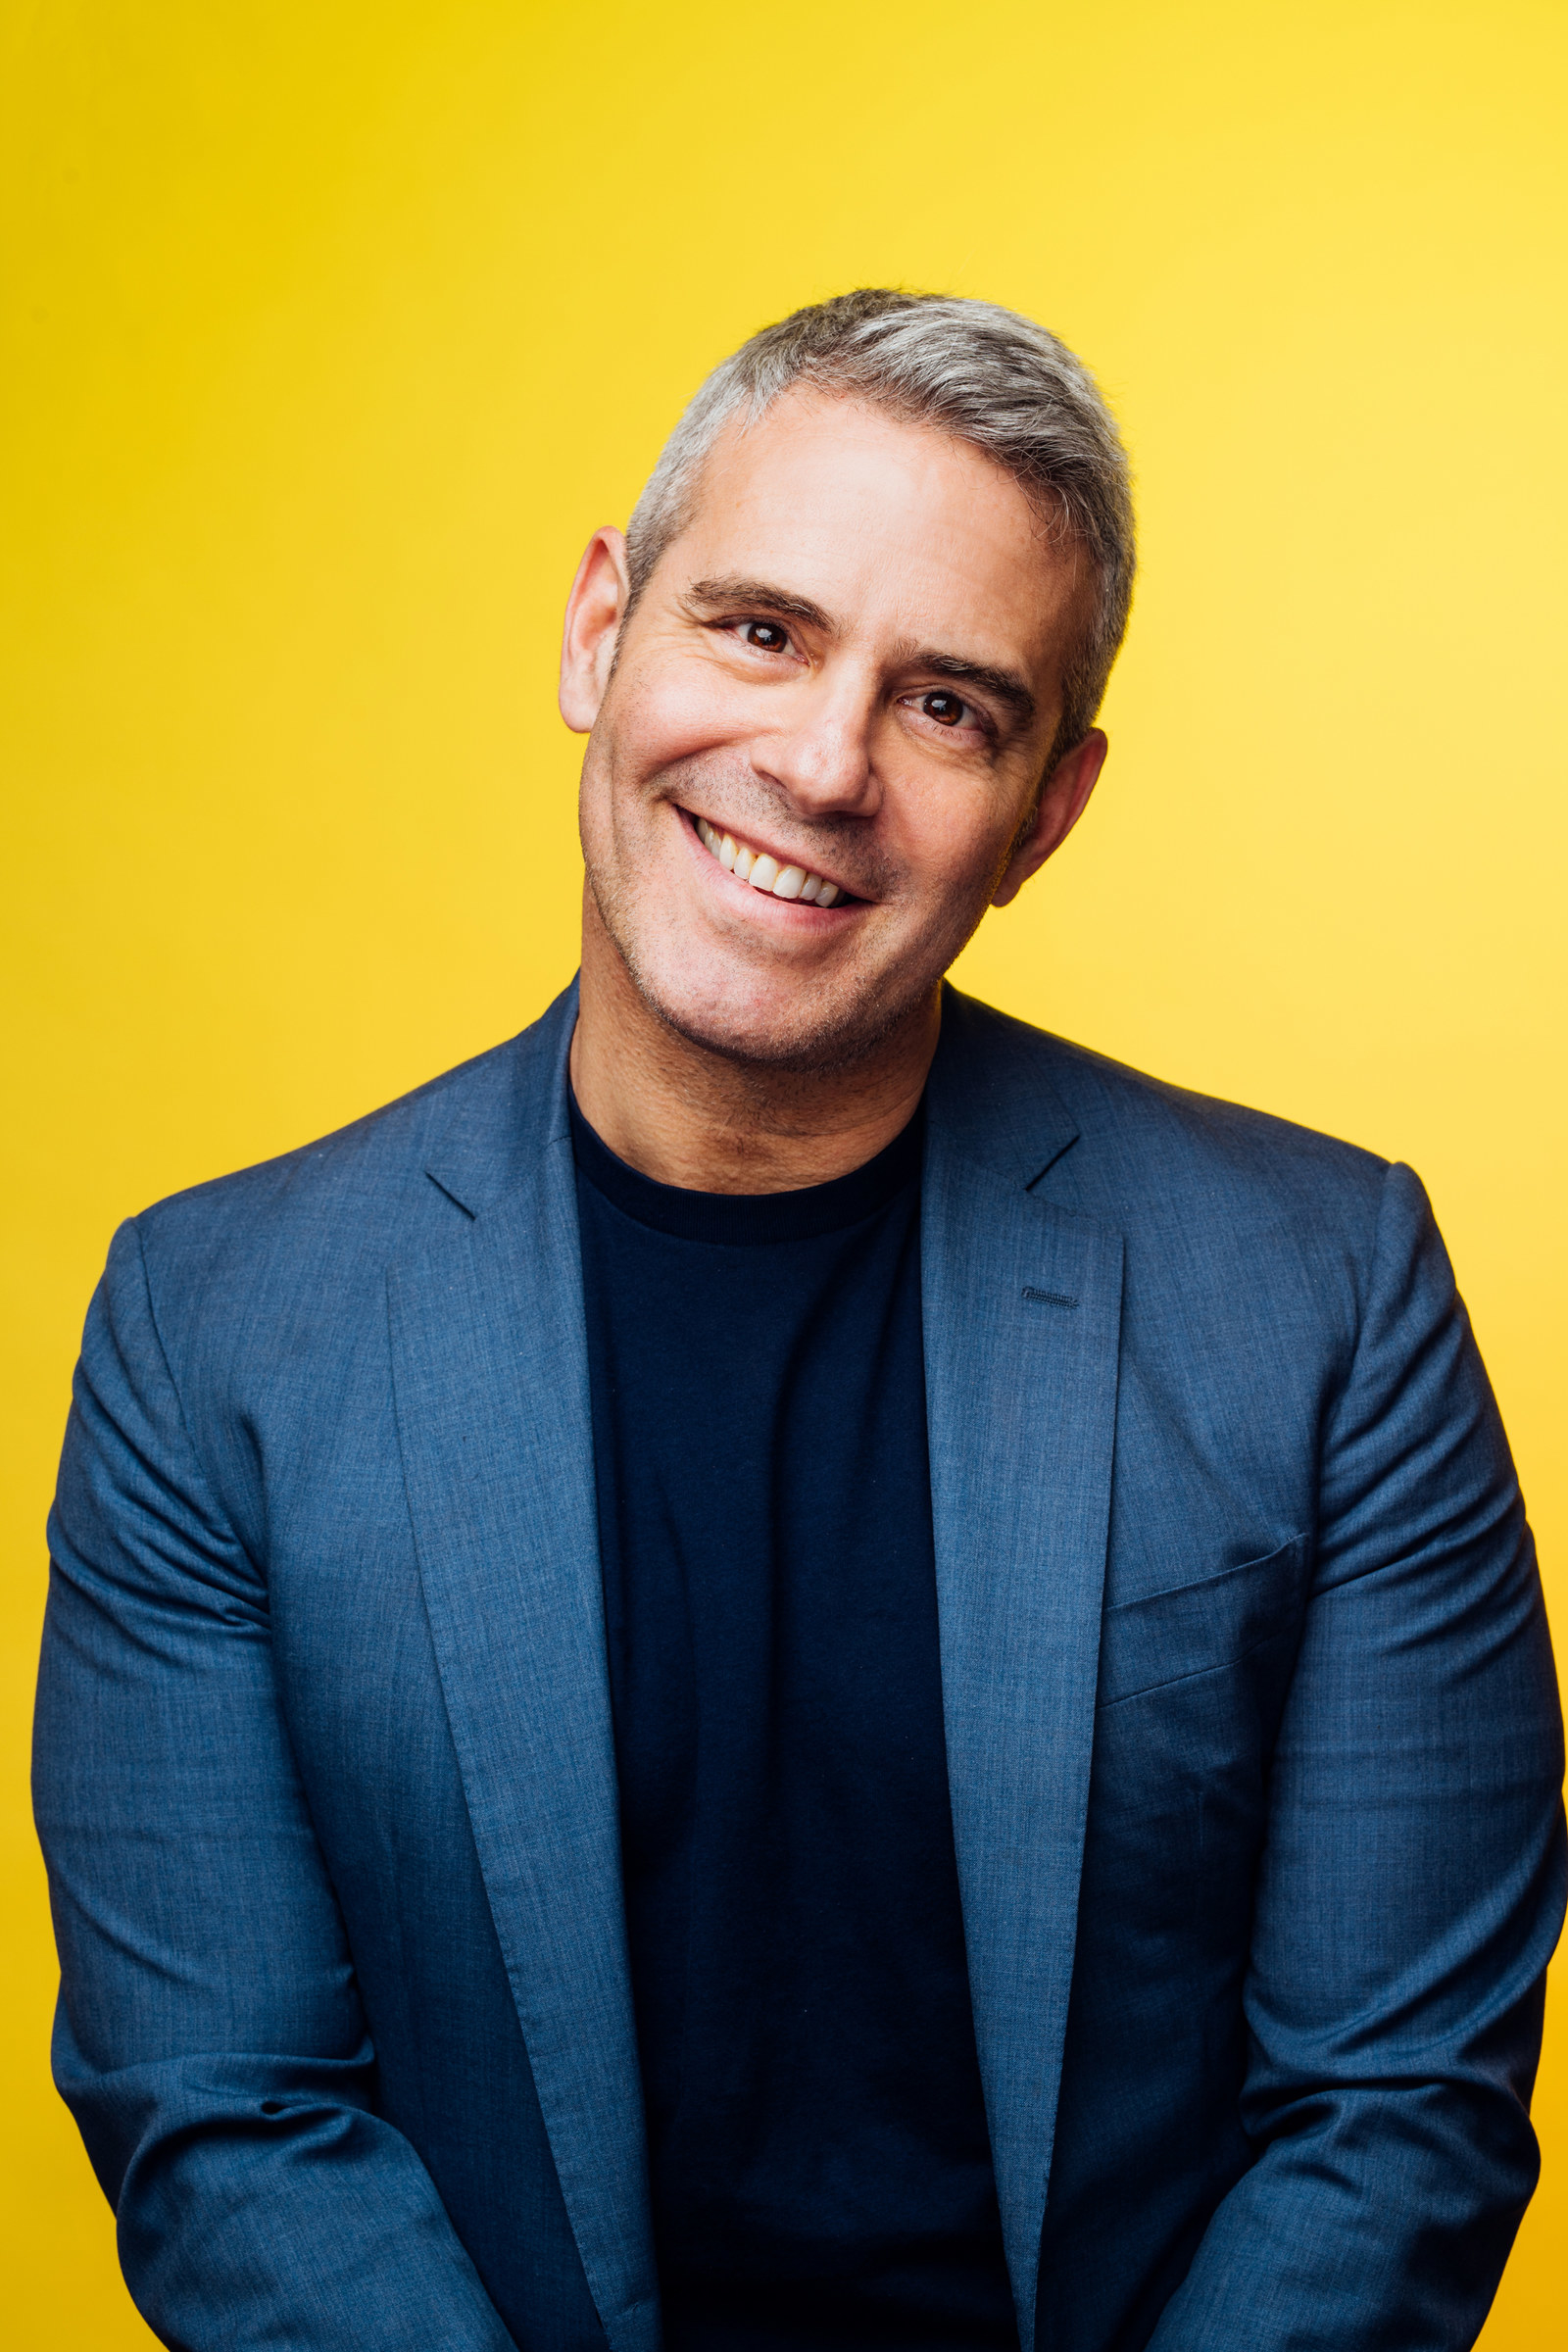 Andy Cohen Read Some Reallllly Thirsty Tweets And It's A Lot